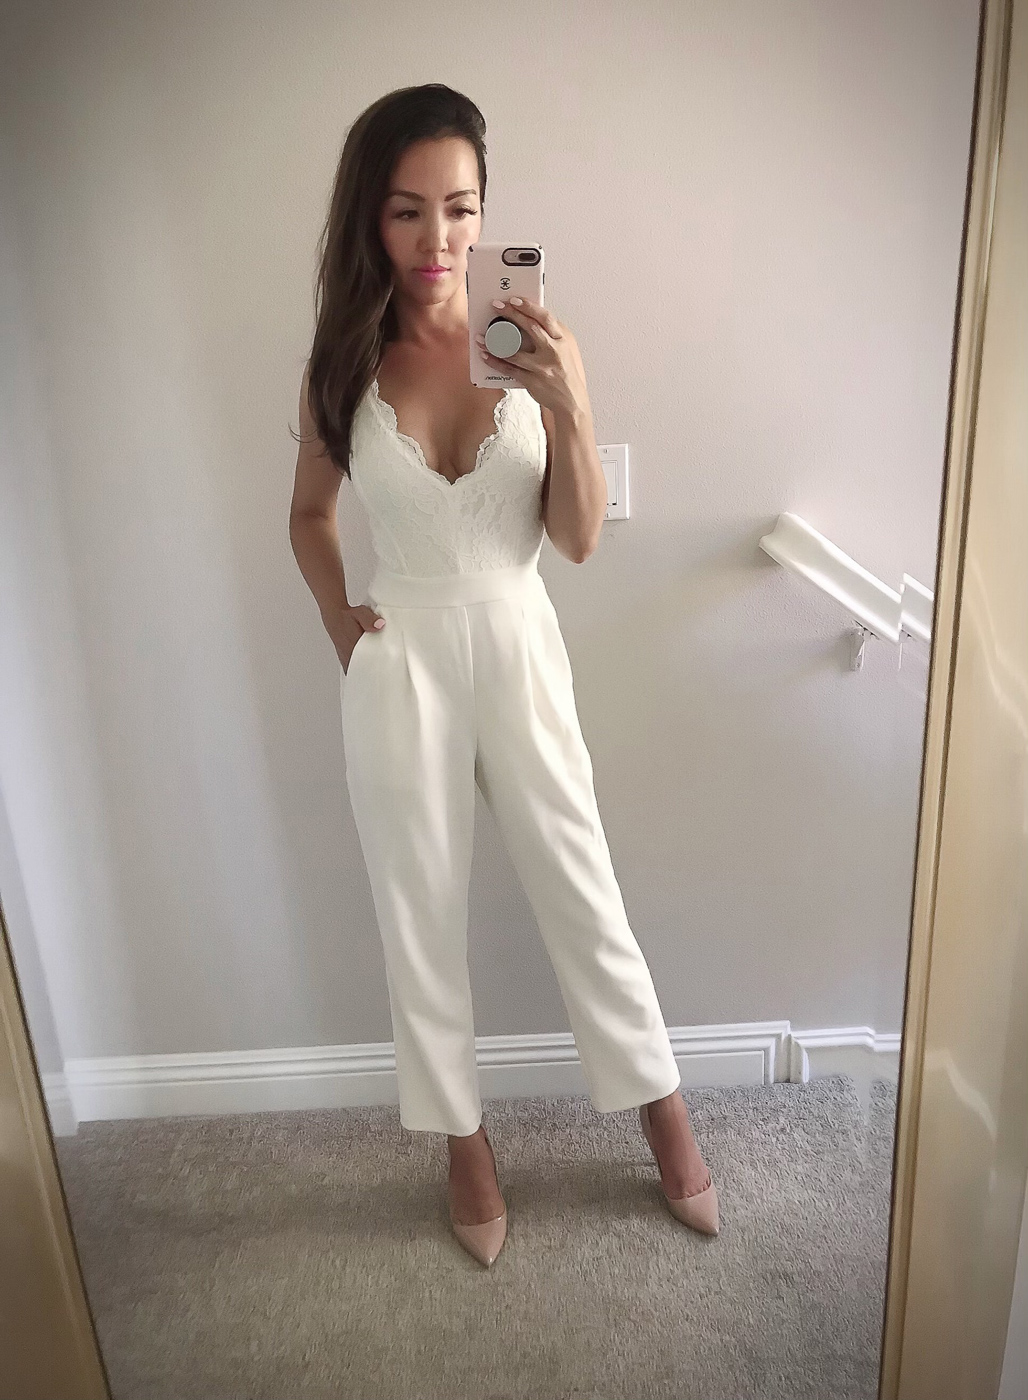 petite jumpsuit white lace summer outfit